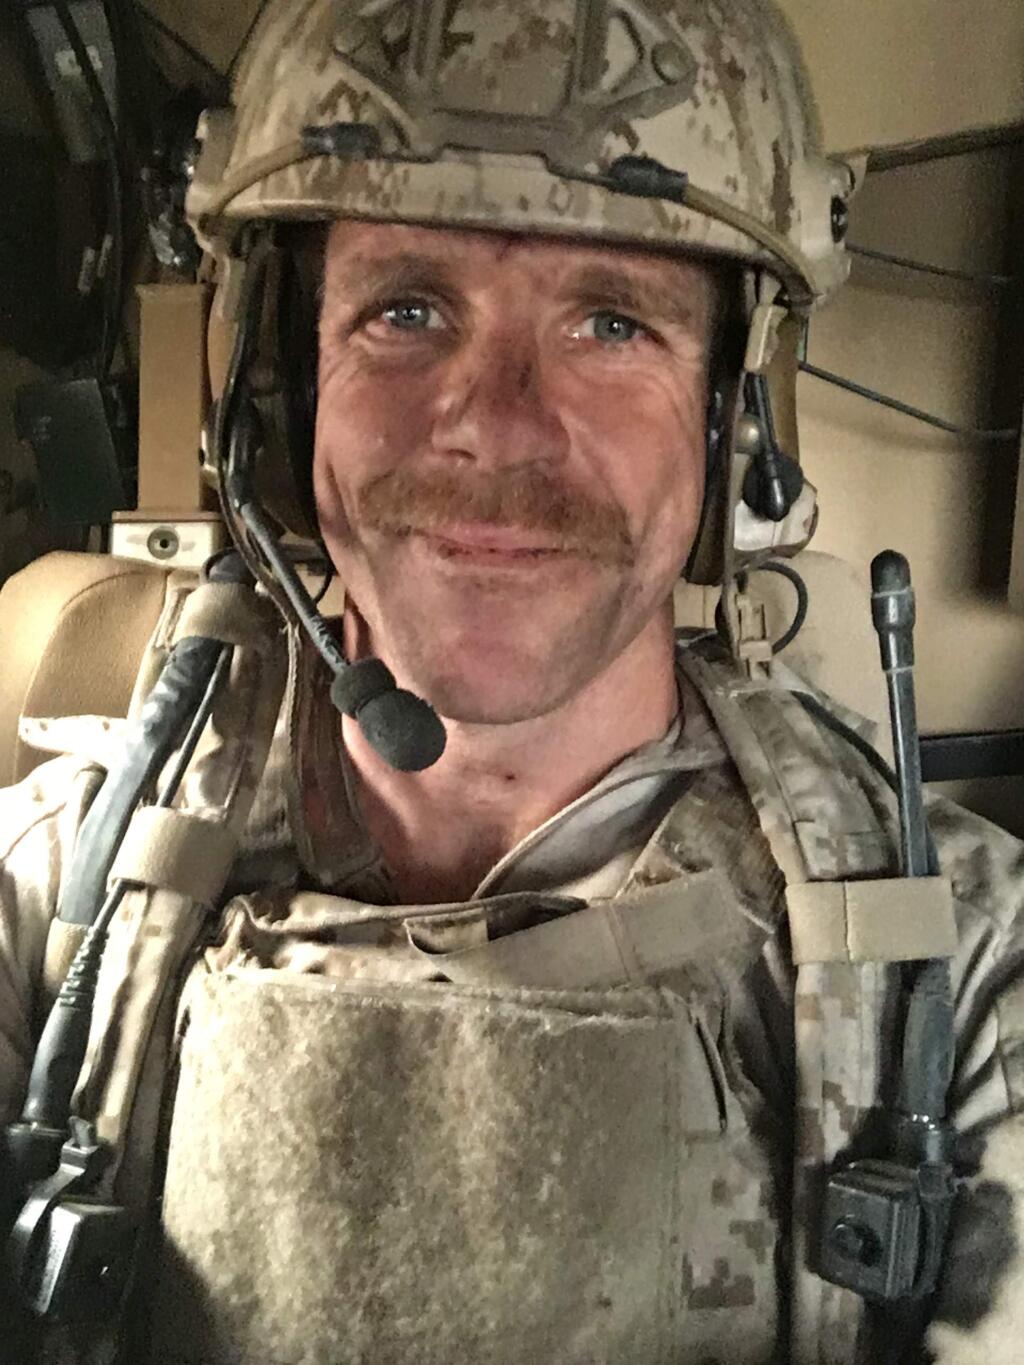 In an undated handout photo, Special Operations Chief Edward Gallagher, seen during his 2017 deployment, who may face a military trial on murder and other charges. Prosecutors say Gallagher turned bloodthirsty on his eighth deployment, shooting civilians and stabbing a captive. His lawyer called the charges baseless. (Handout via The New York Times) -- NO SALES; FOR EDITORIAL USE ONLY WITH NYT STORY NAVY SEAL CHARGES BY DAVE PHILIPPS FOR NOV. 16, 2018. ALL OTHER USE PROHIBITED. --